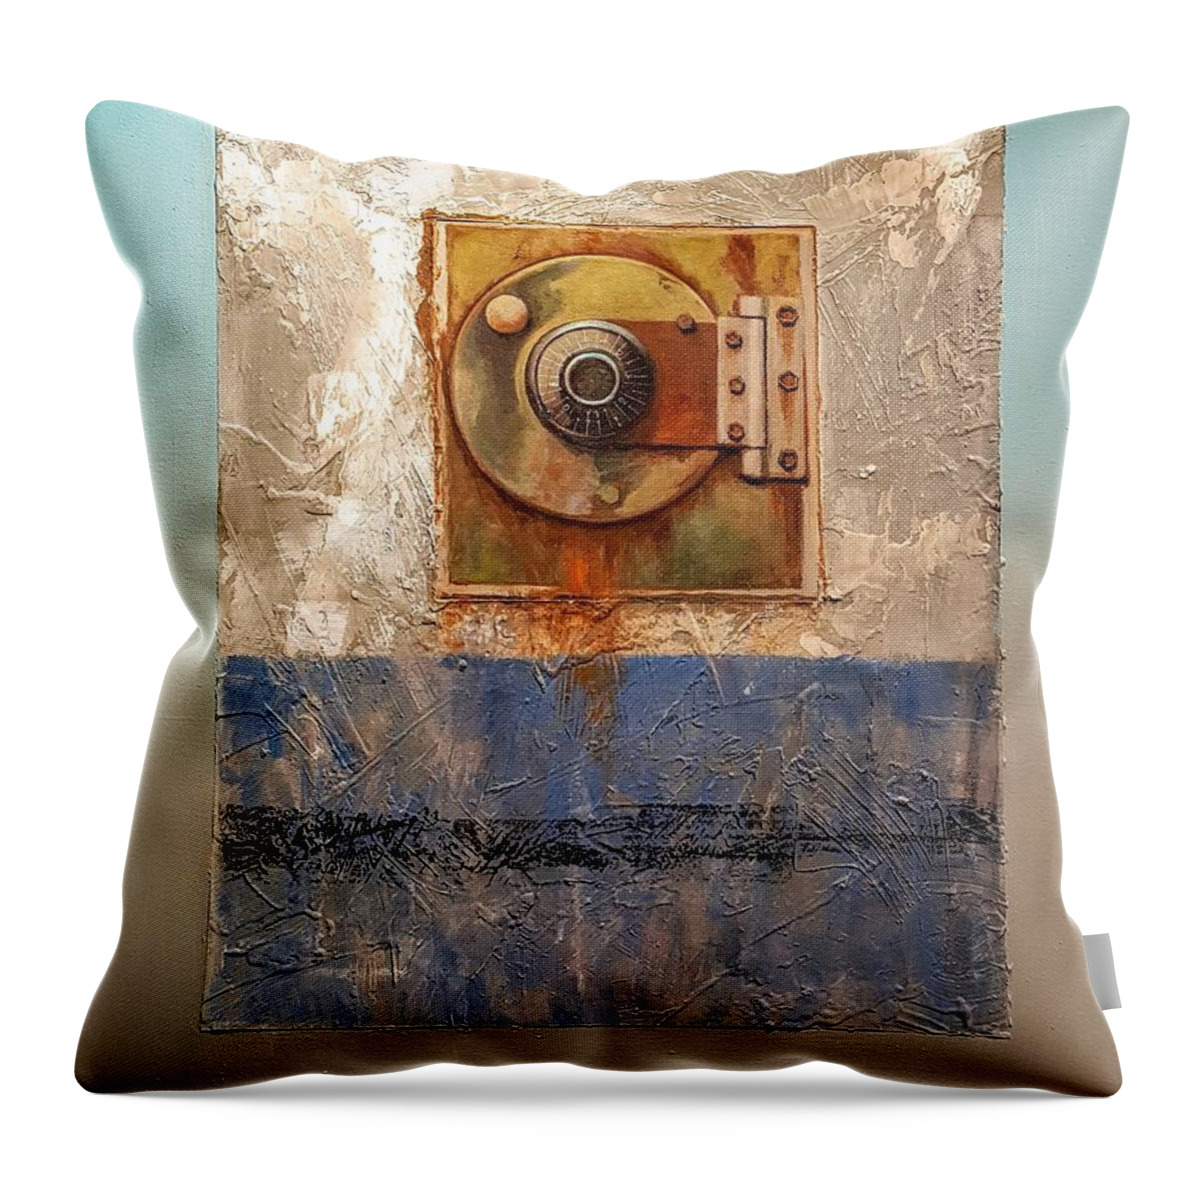  Throw Pillow featuring the painting Locked Combination by Jessica Anne Thomas